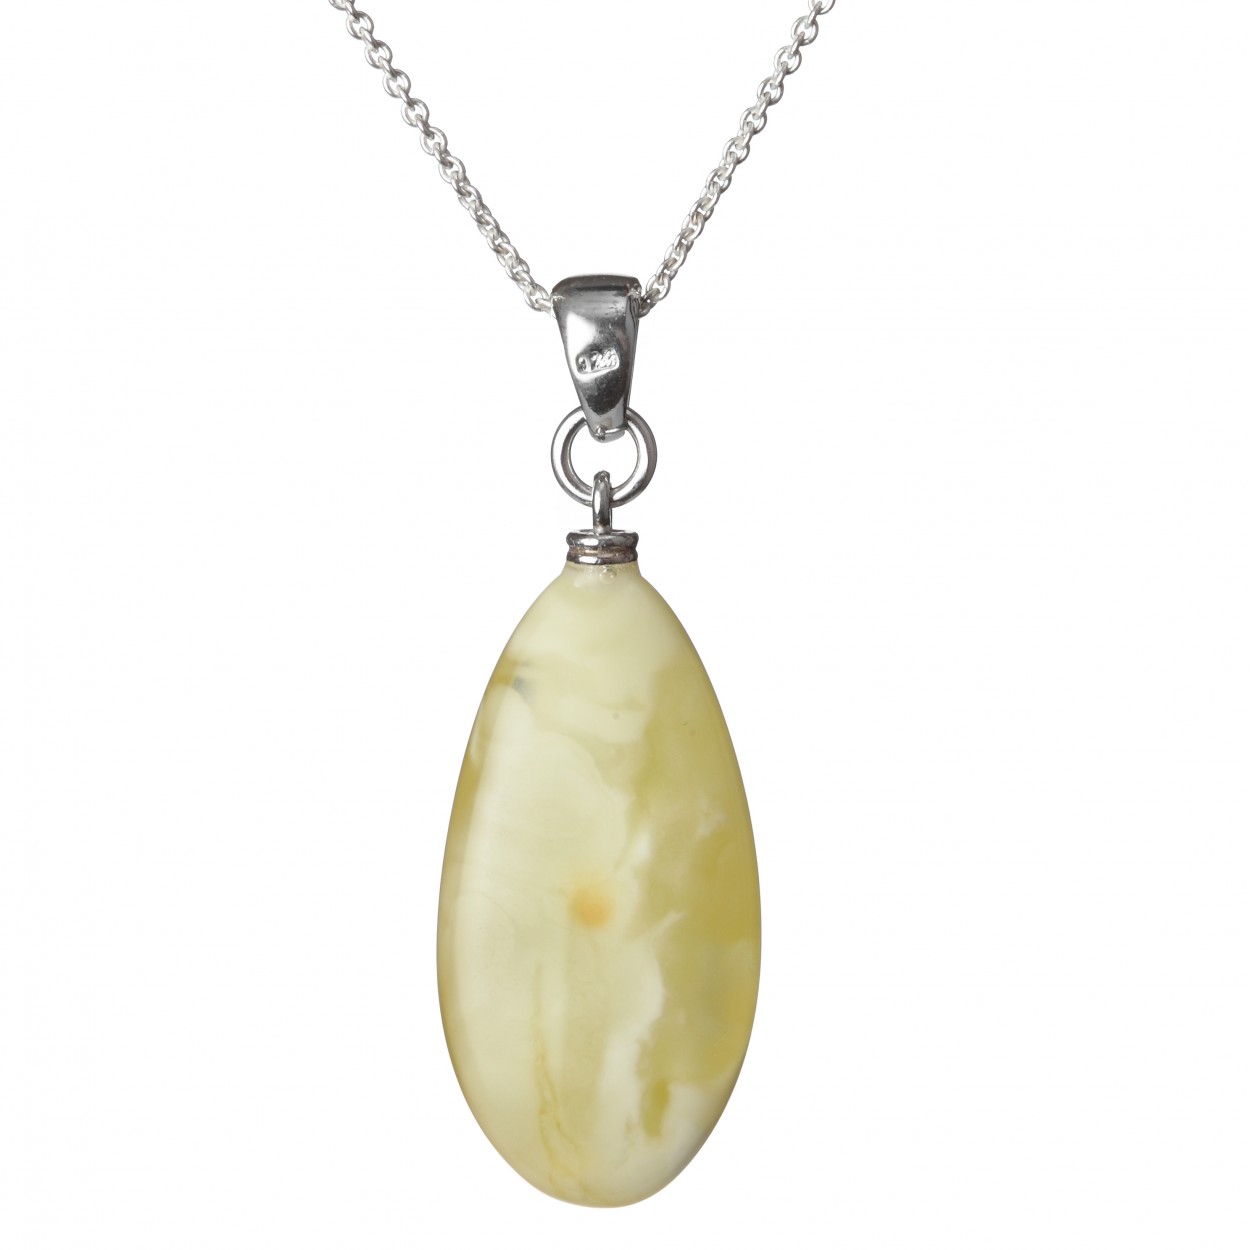  Yellow Amber Pendant on the Silver Chain